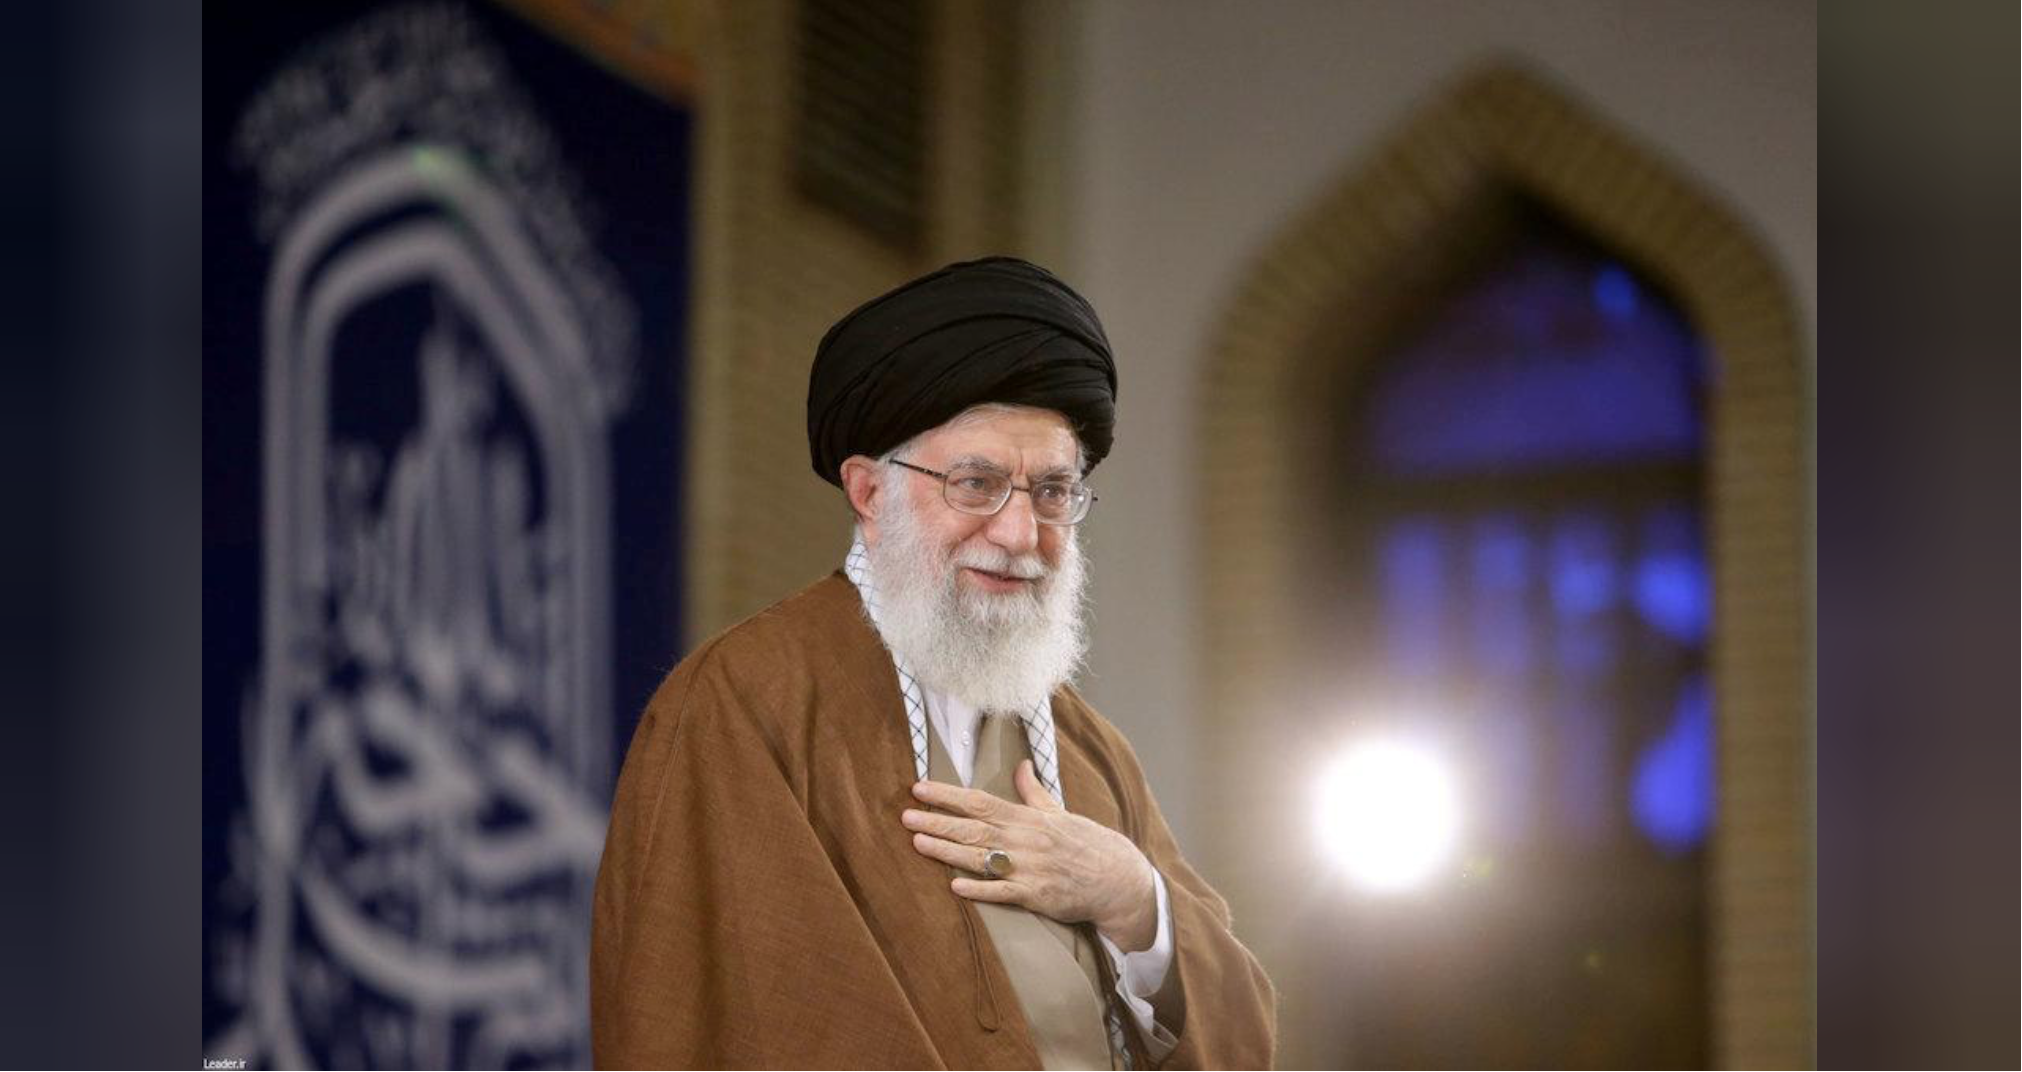 America targets Middle East as it fears Islamic strengthening: Iran leader